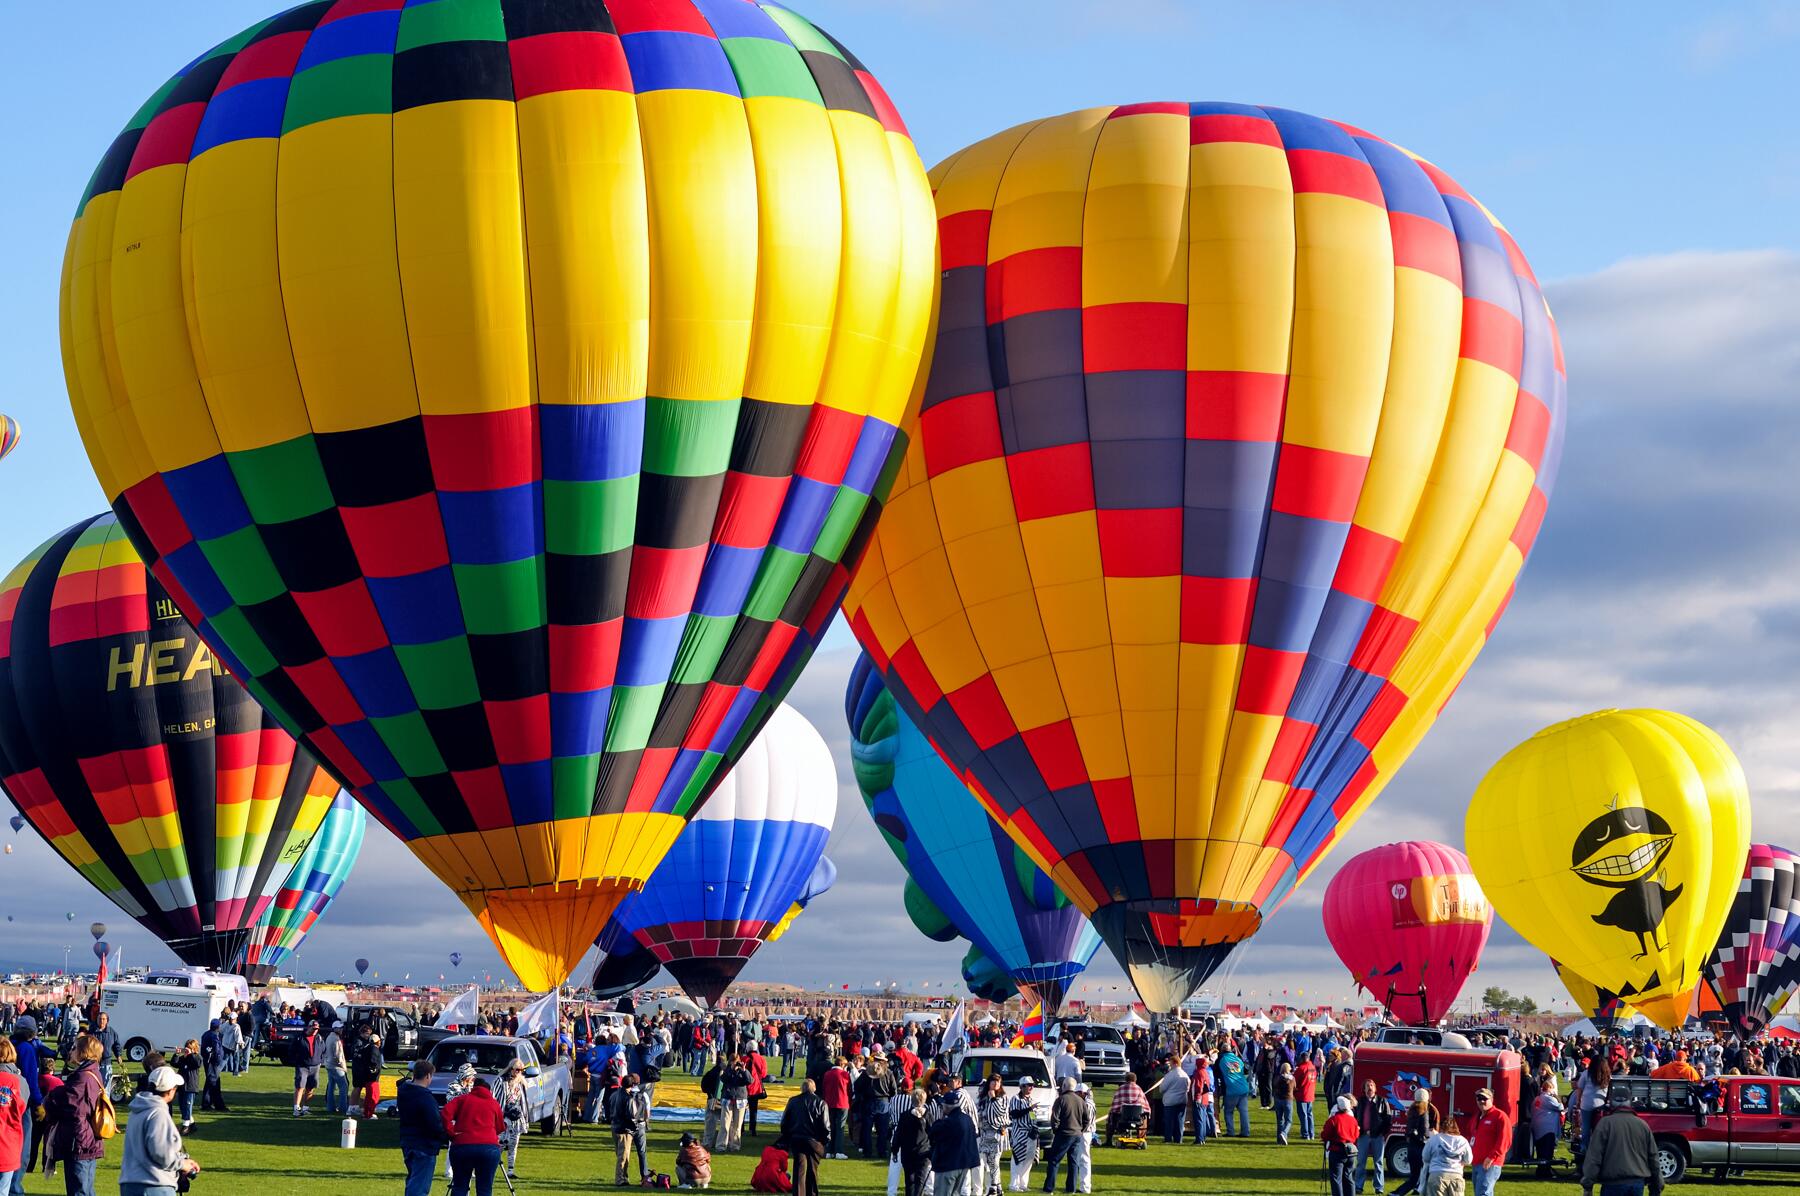 The Best (and Most Magical) Balloon Festivals in the United States